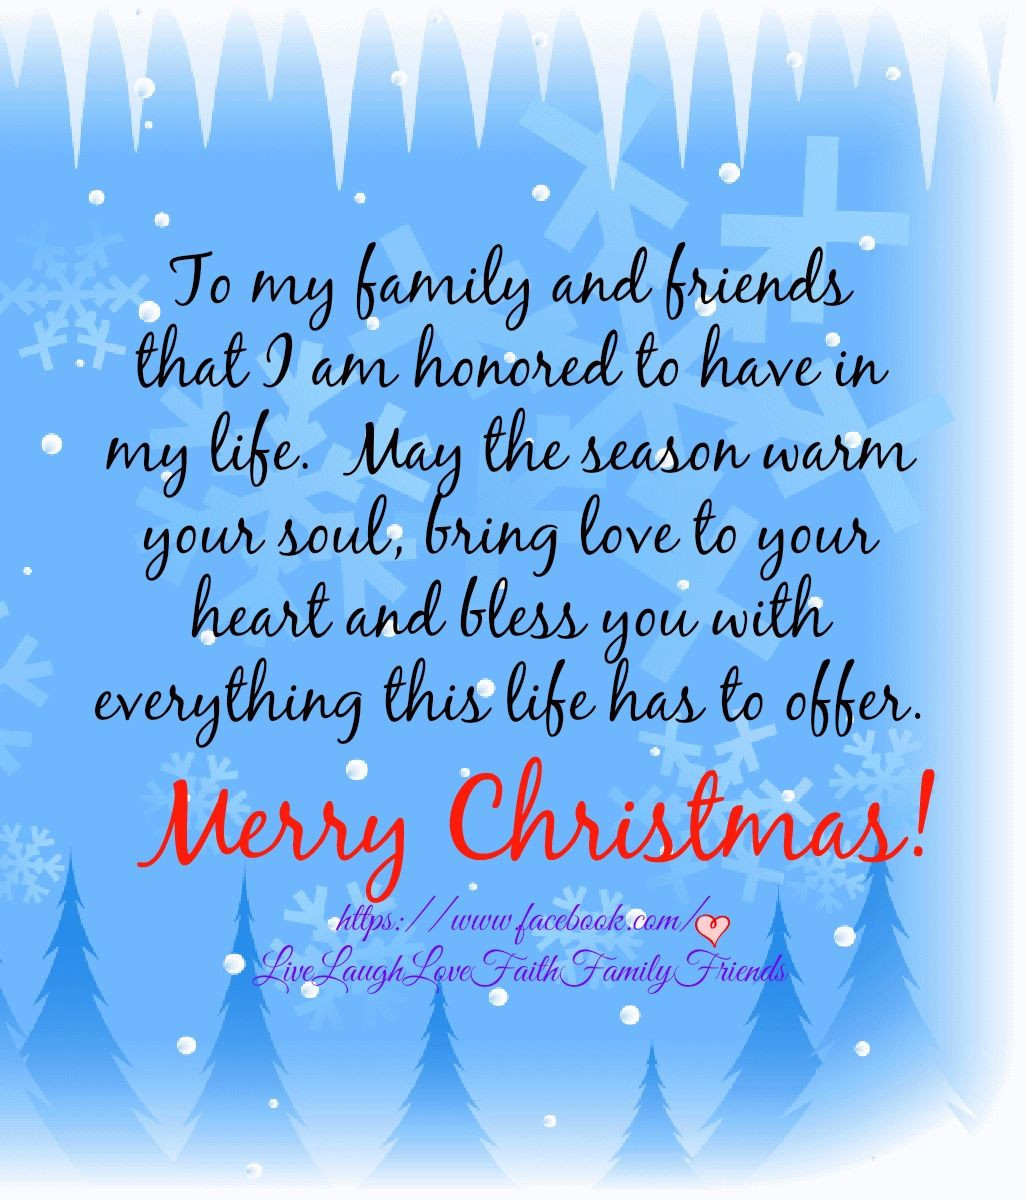 Merry Christmas Everyone Quotes
 Merry Christmas XOXO perfect for this weekend Lucky to